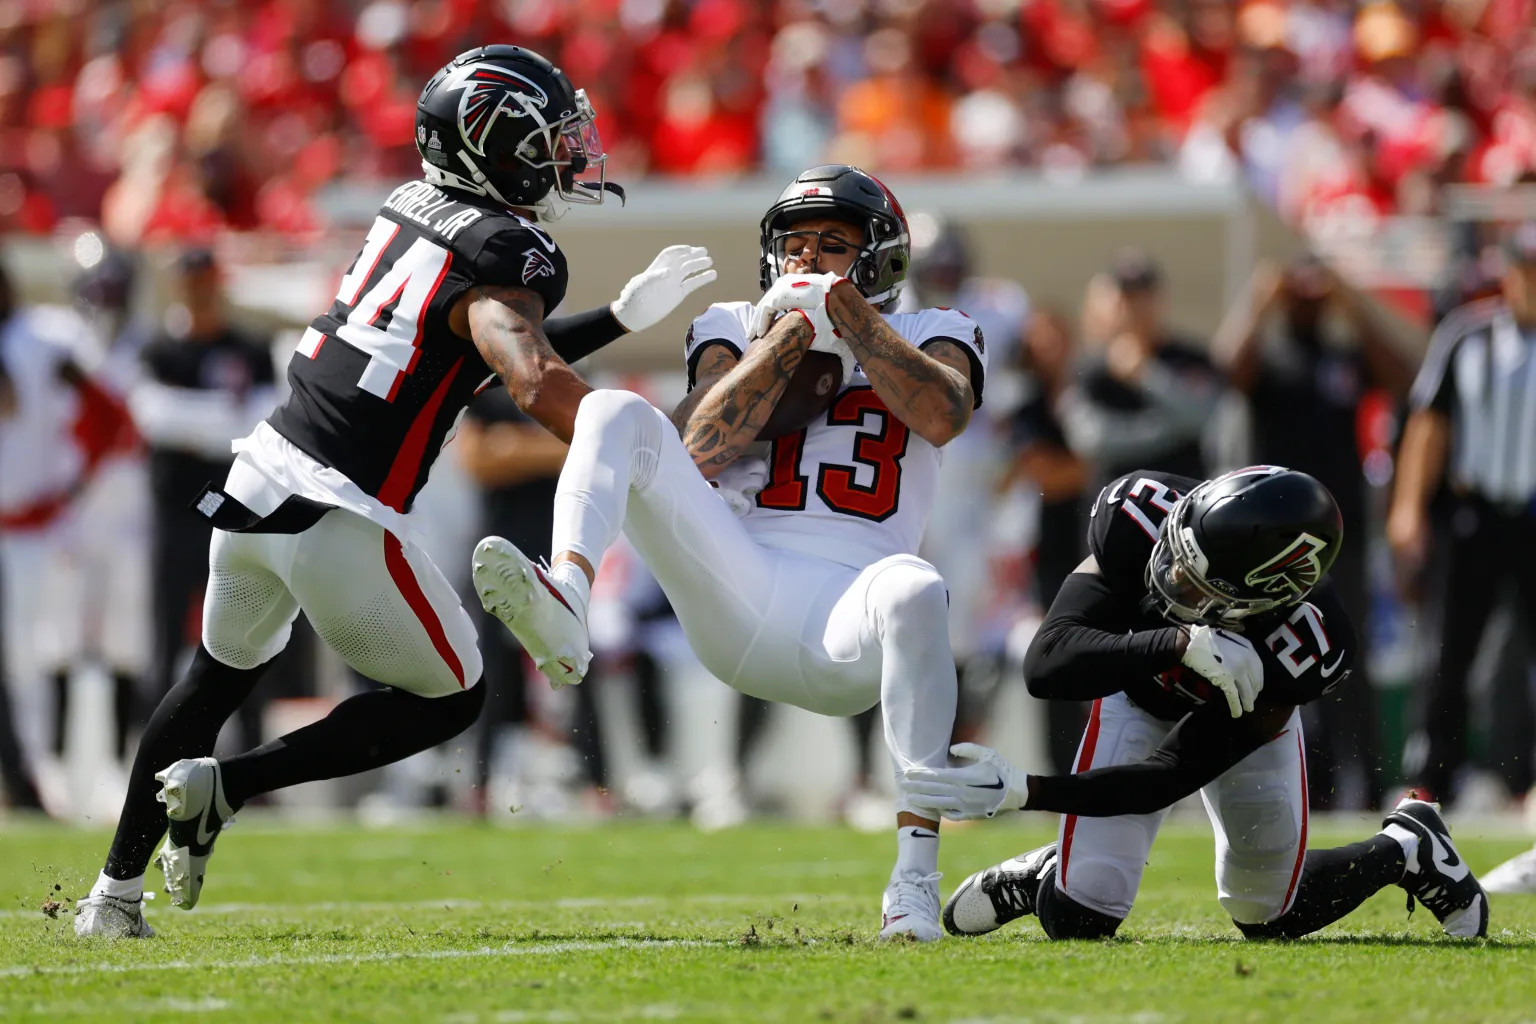 Buccaneers WR Mike Evans hauls in a catch between two Falcons defenders.